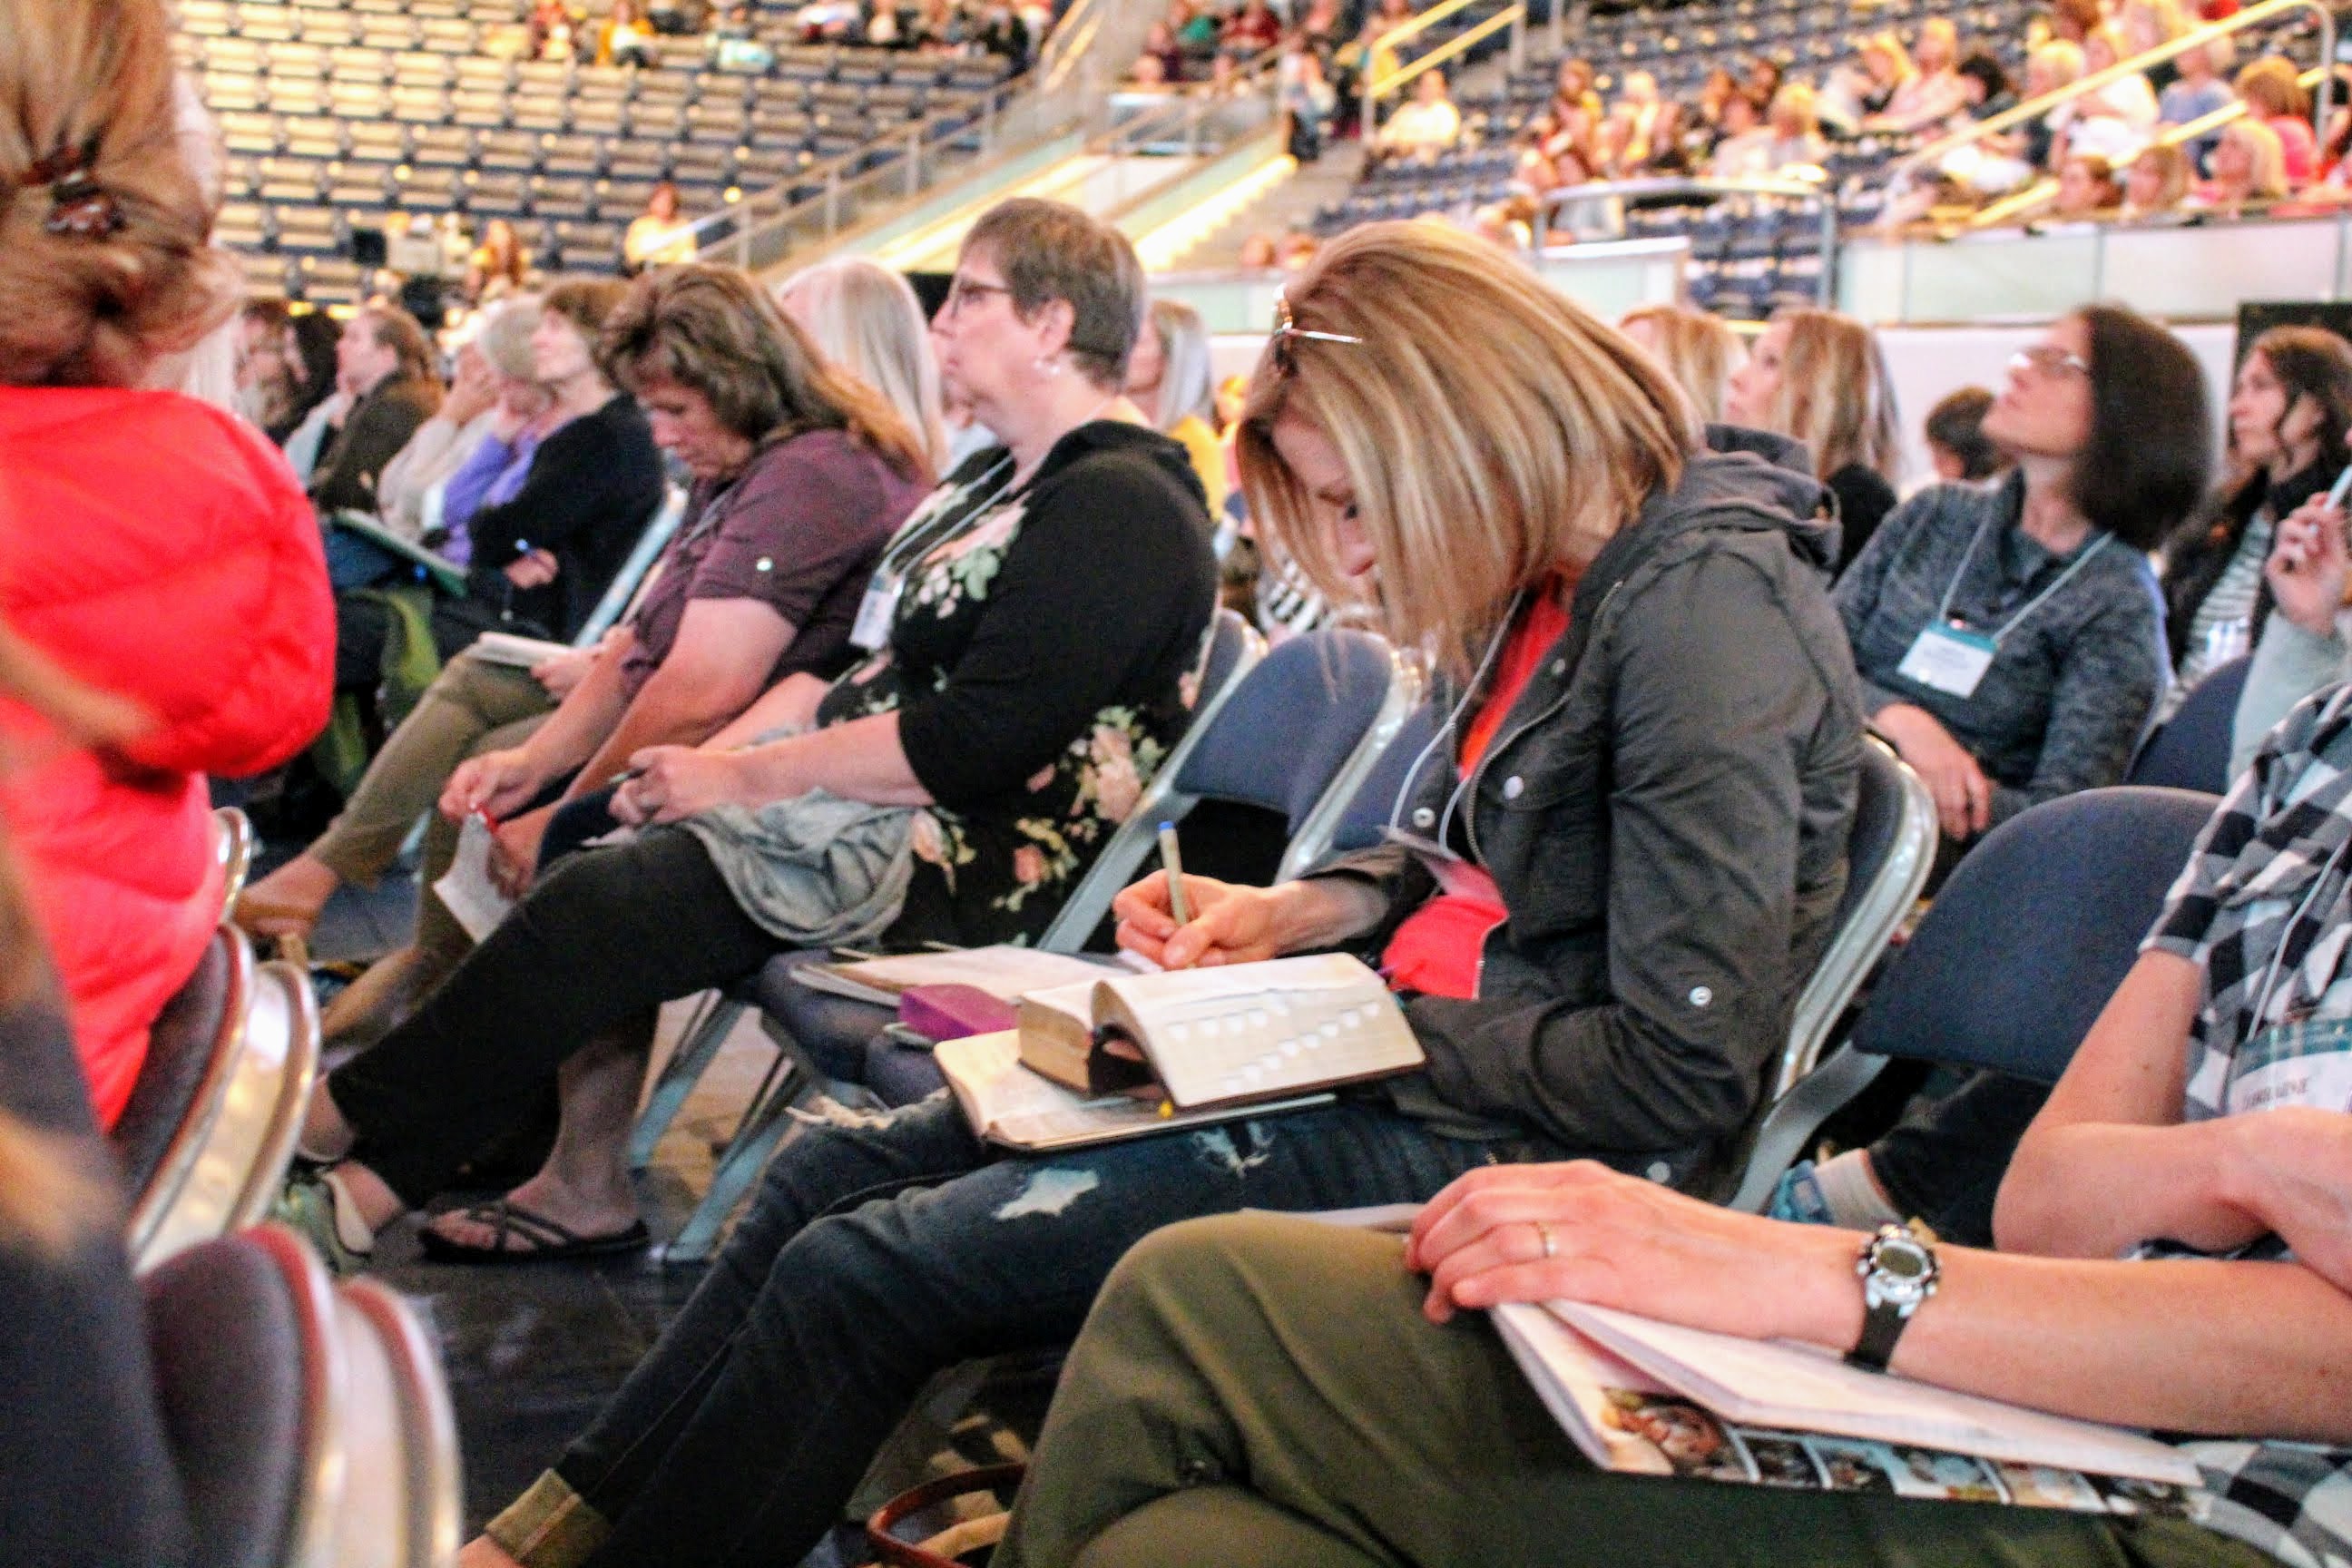 BYU Women's Conference to be streamed online The Daily Universe